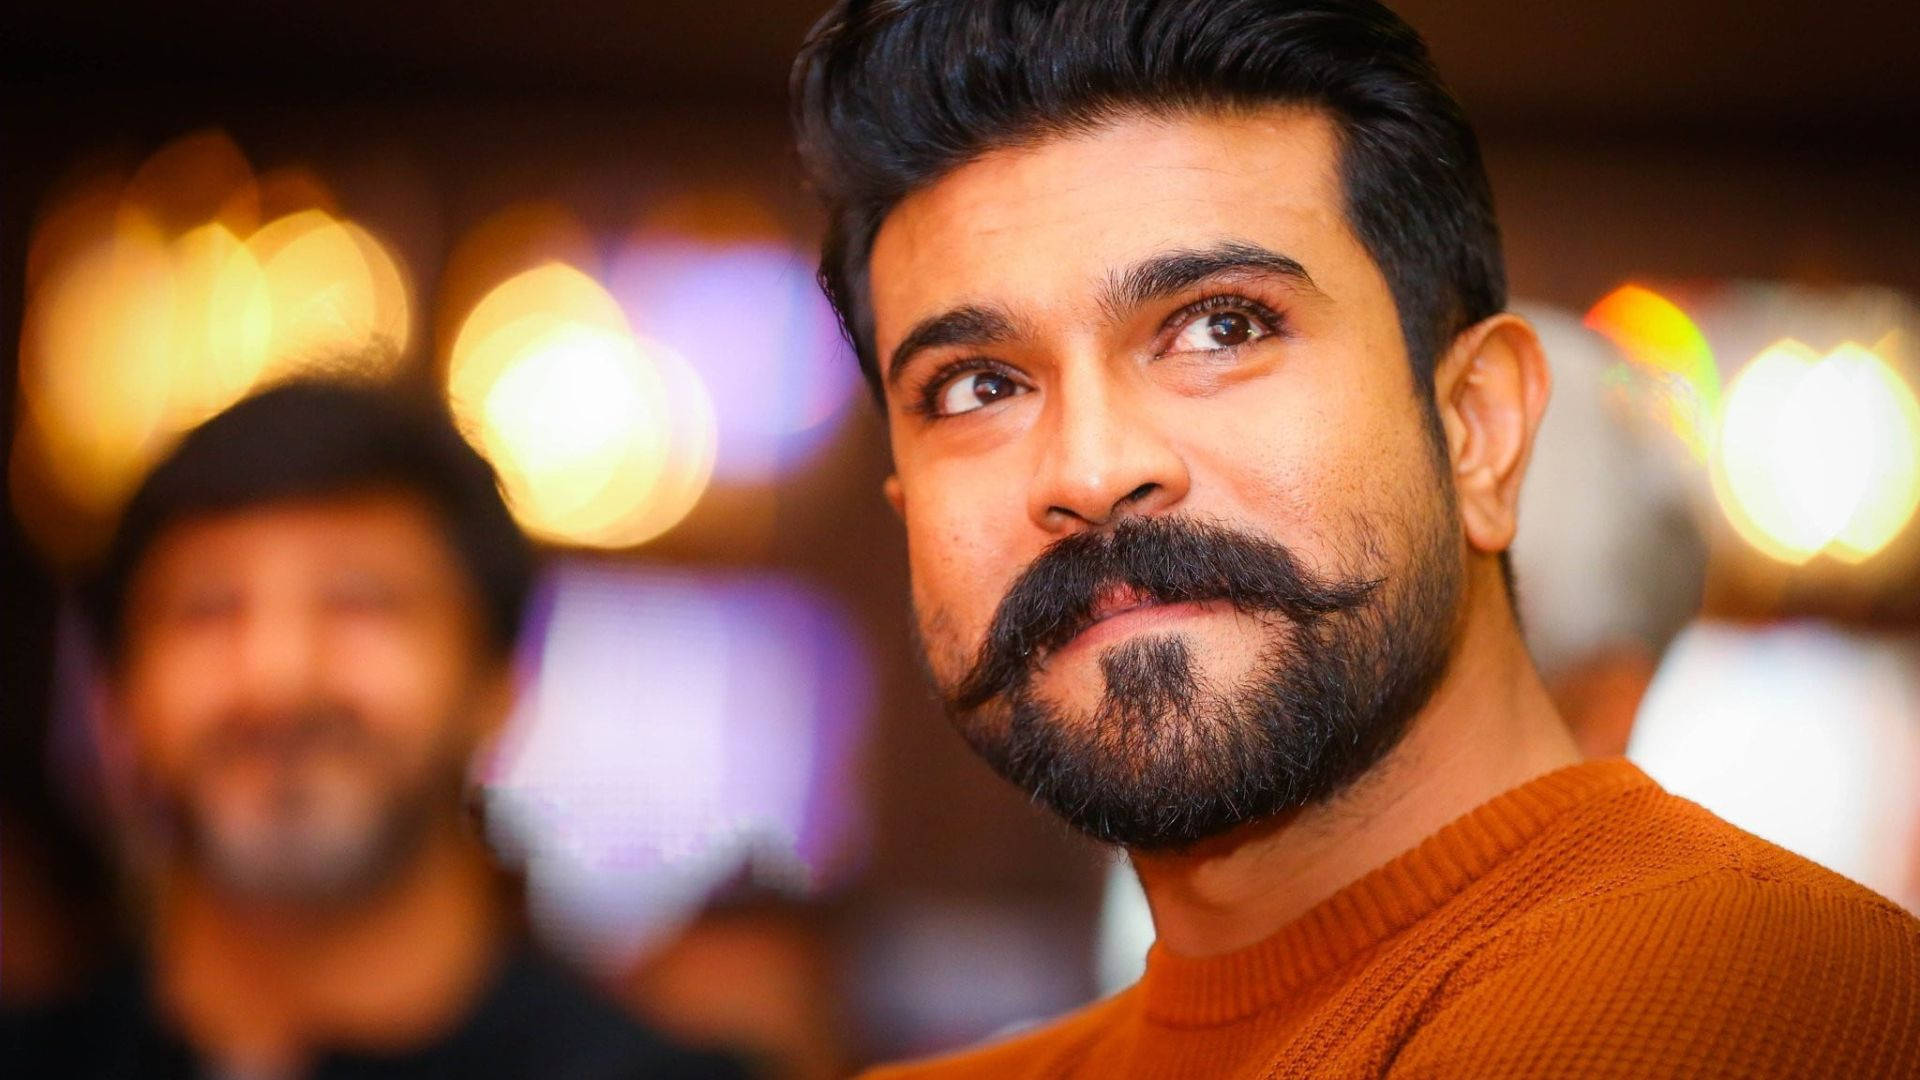 Ram Charan Looking Sophisticated In A Knitted Sweater Background